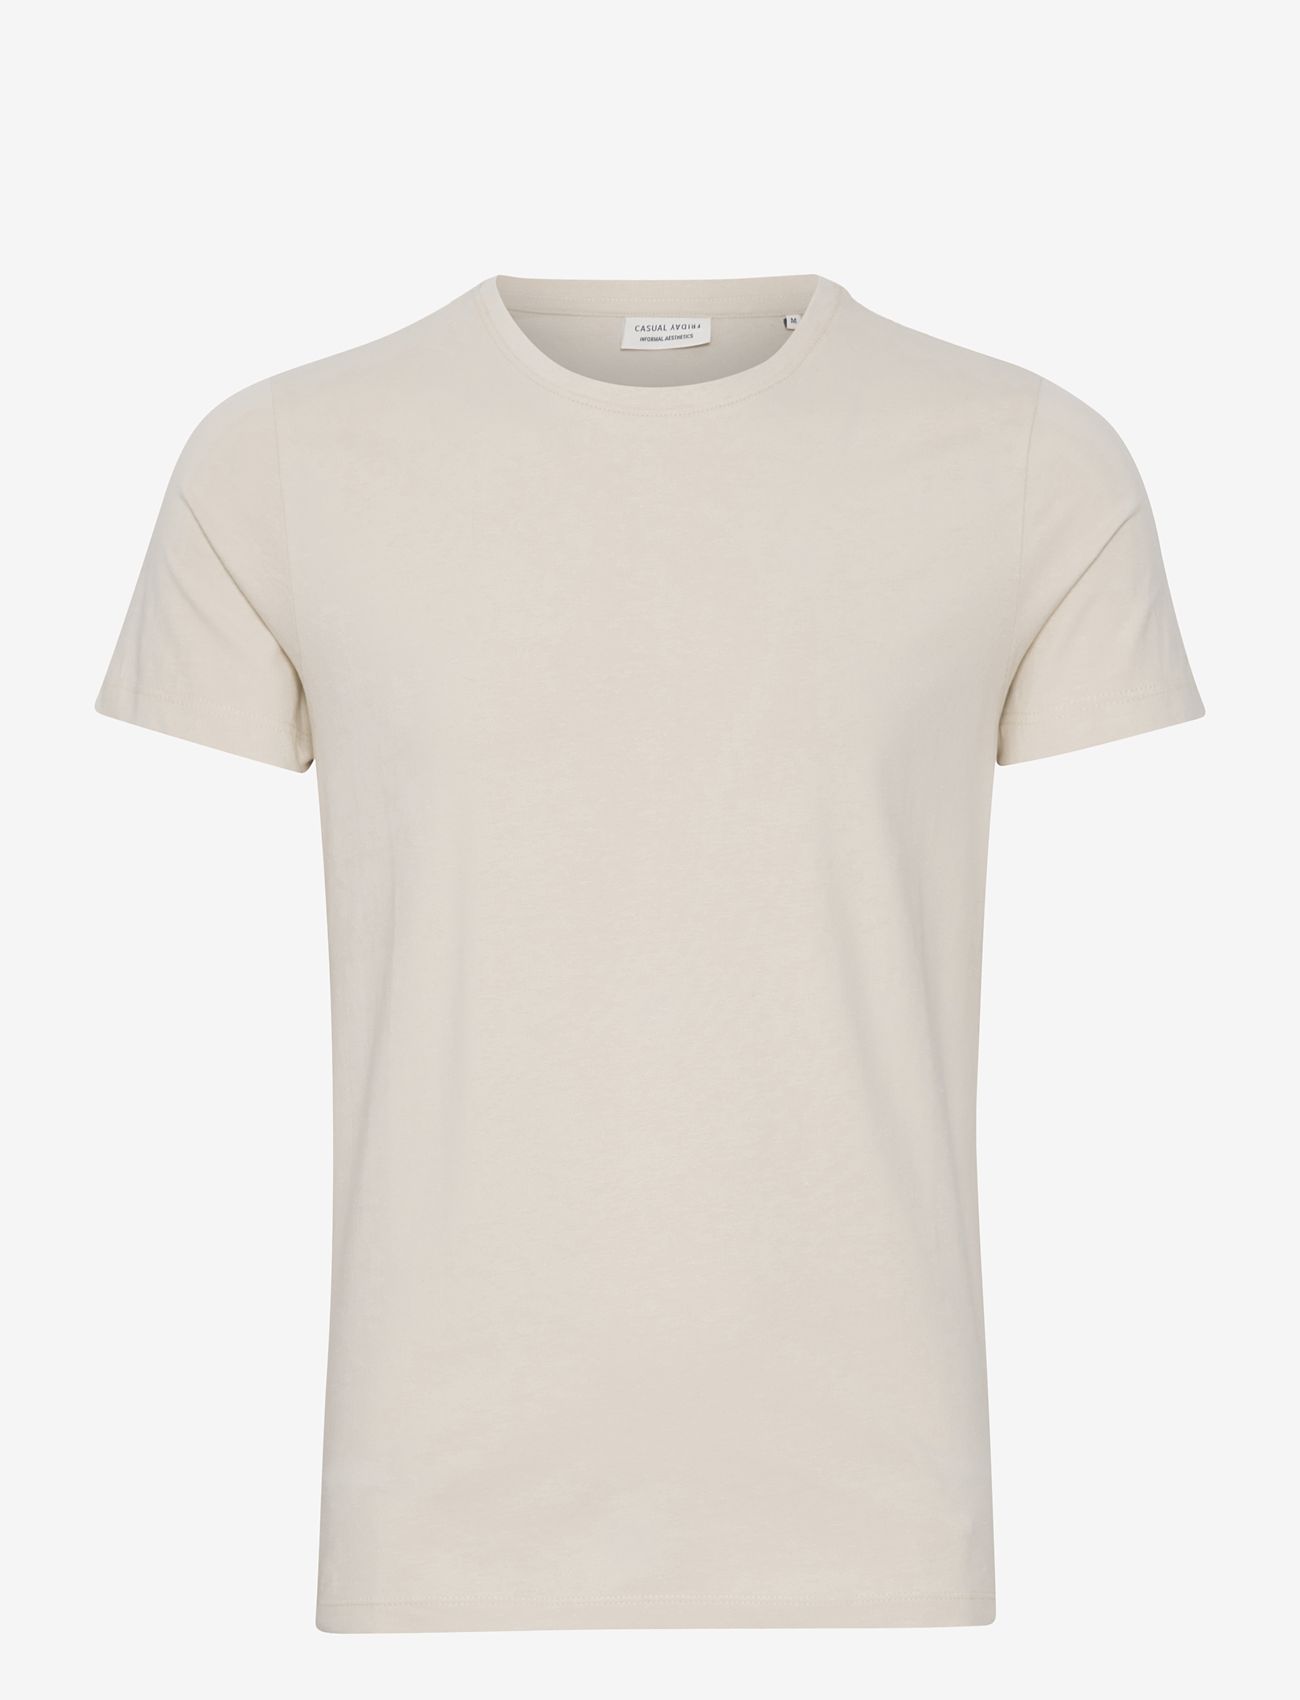 Casual Friday - CFDAVIDE crew neck tee - lowest prices - pumice stone - 0